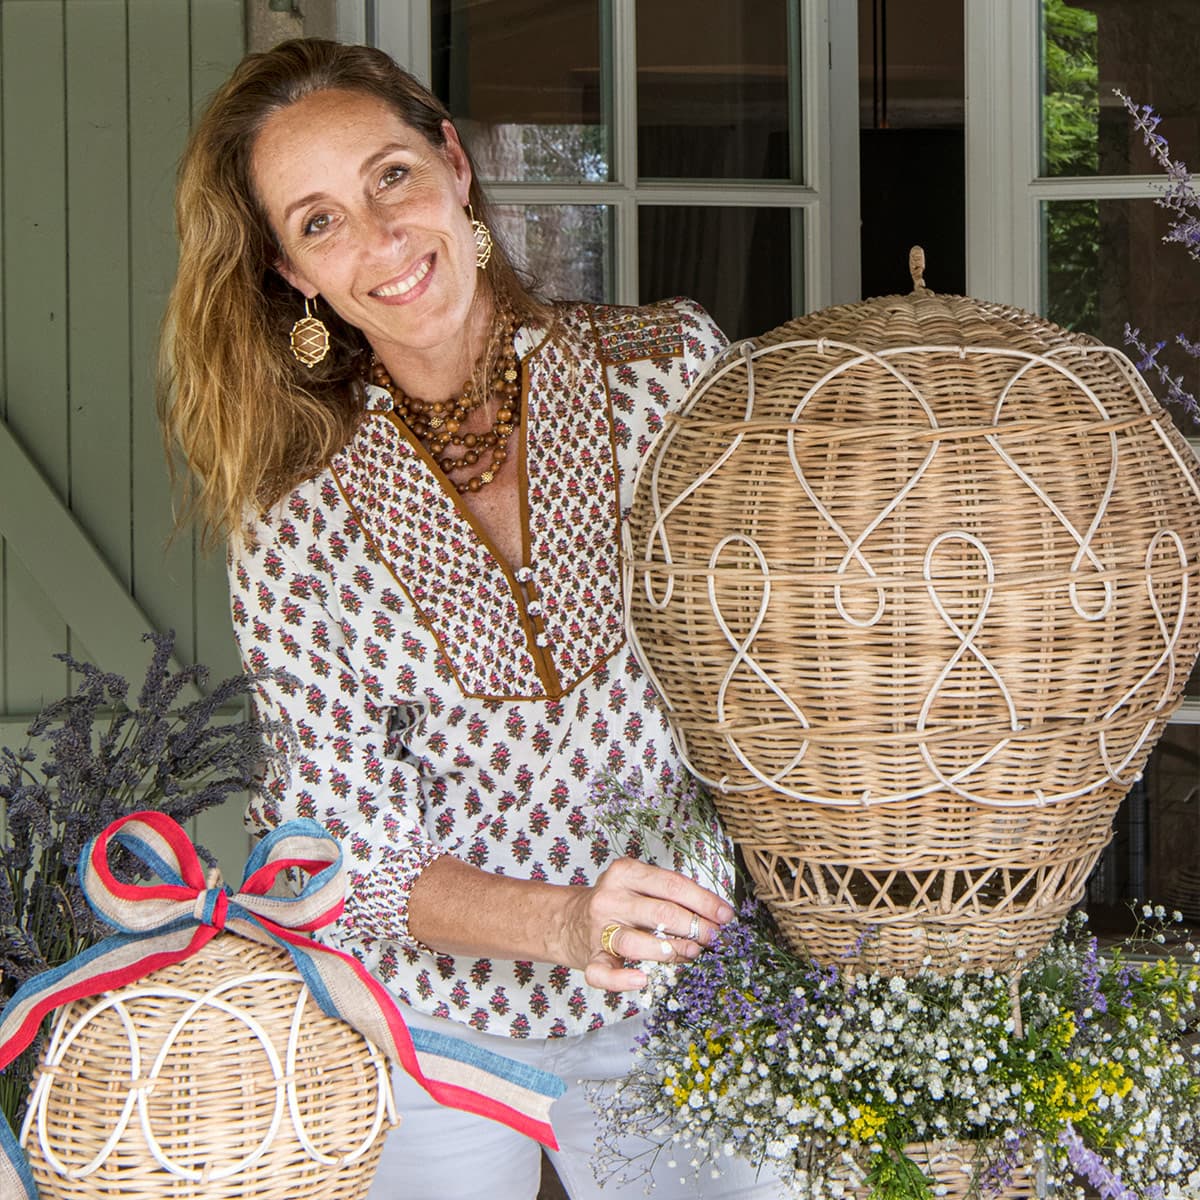 Capucine De Wulf Gooding poses with rattan hot air balloons.